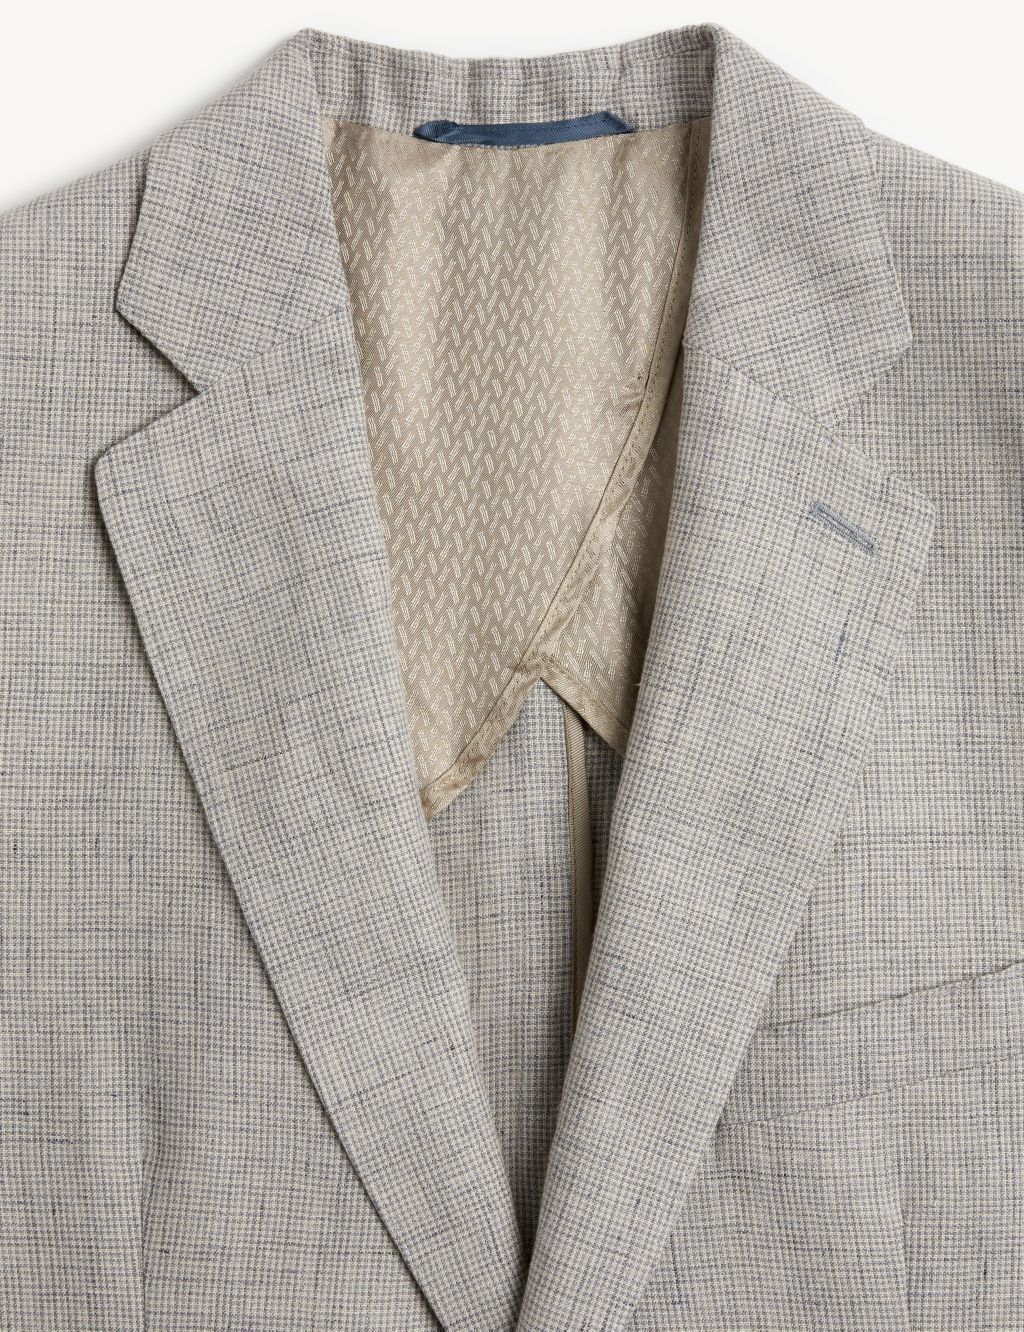 Pure Linen Puppytooth Jacket image 9